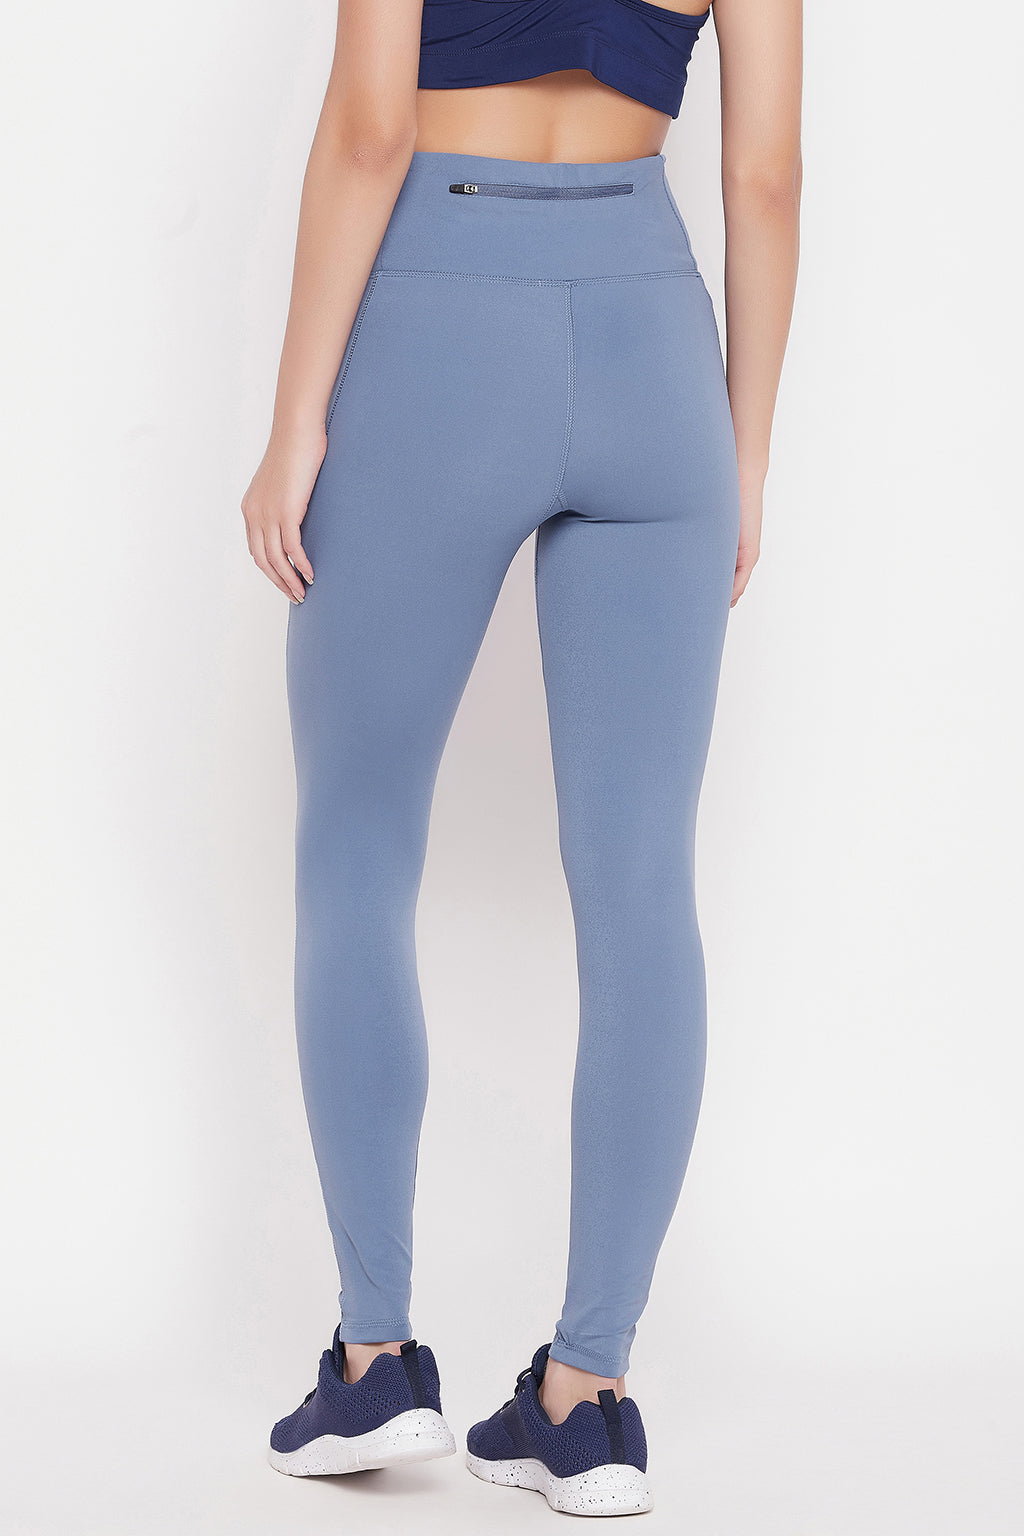 Powder Blue High-Rise Ankle-Length 3 Pocket Active Tights